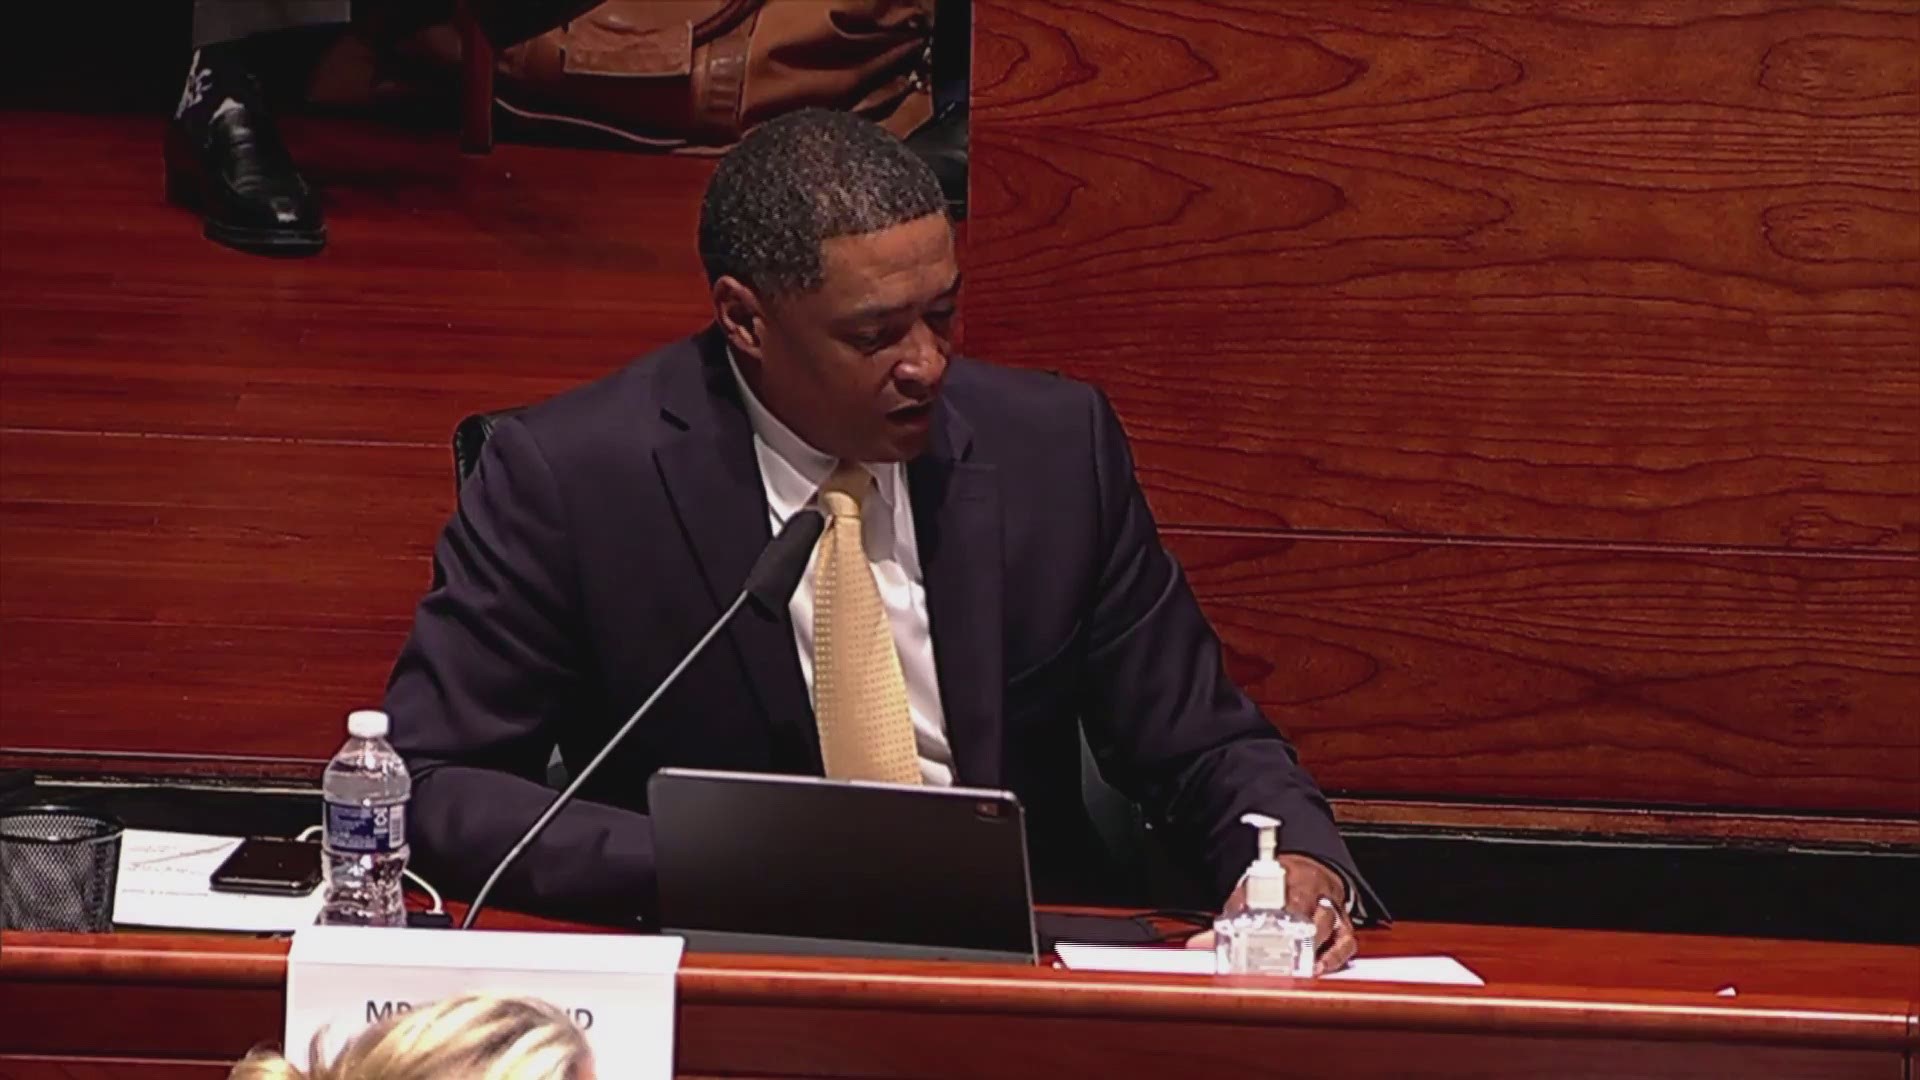 Louisiana Rep. Cedric Richmond and Florida Rep. Matt Gaetz got into a heated exchange during a markup of the Justice in Policing Act on Wednesday.